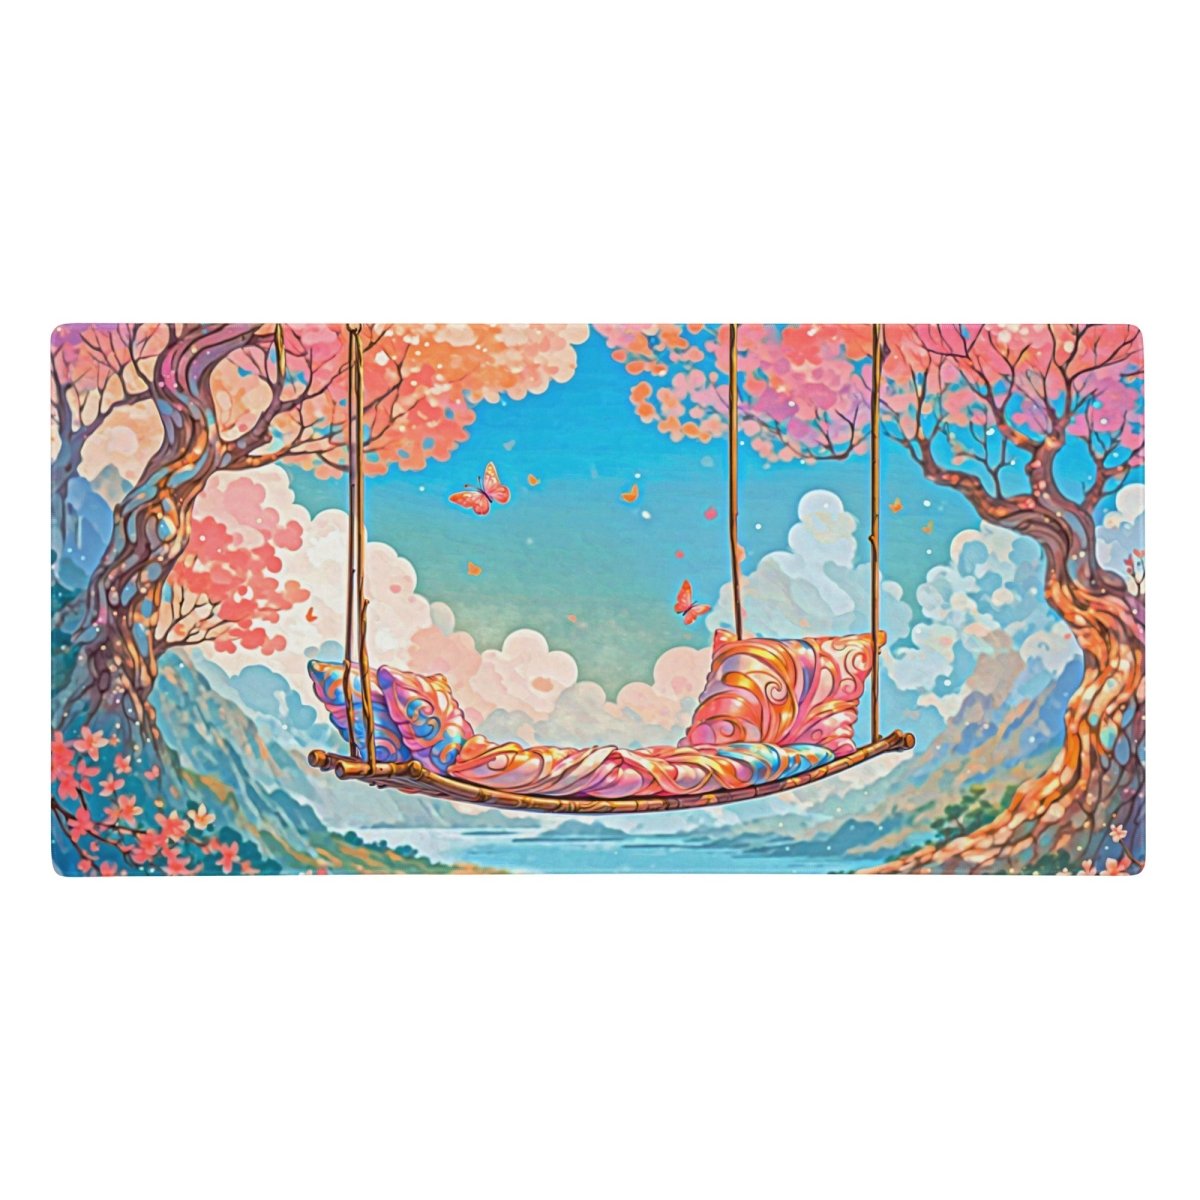 Playful morning - Gaming mouse pad - Ever colorful